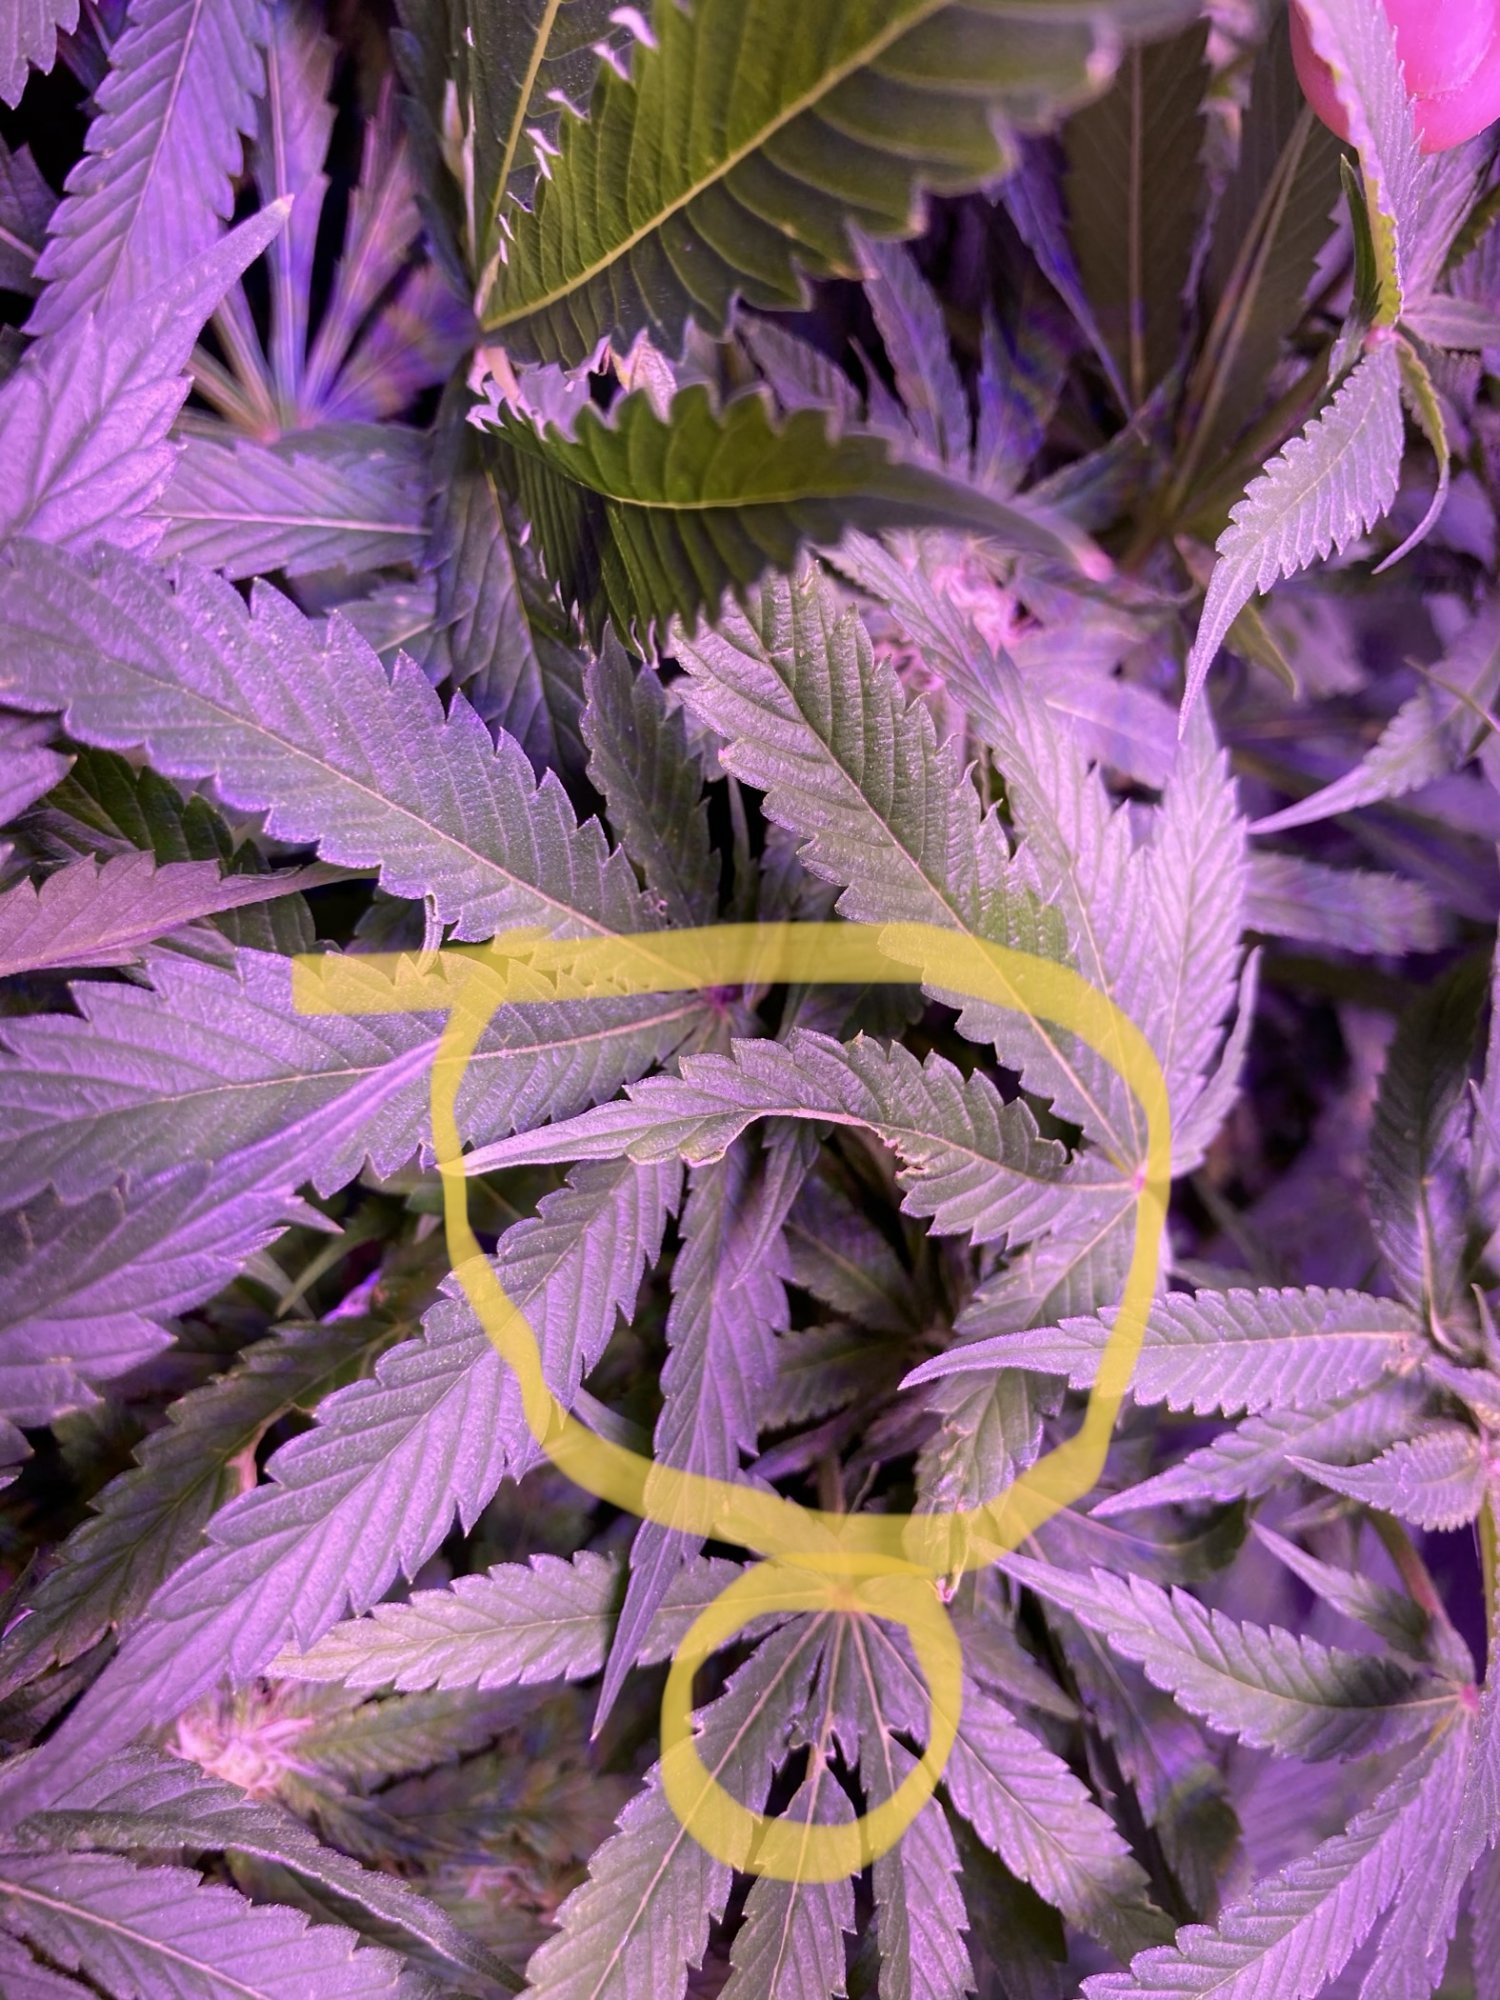 Any idea what might be wrong with these leaves 2